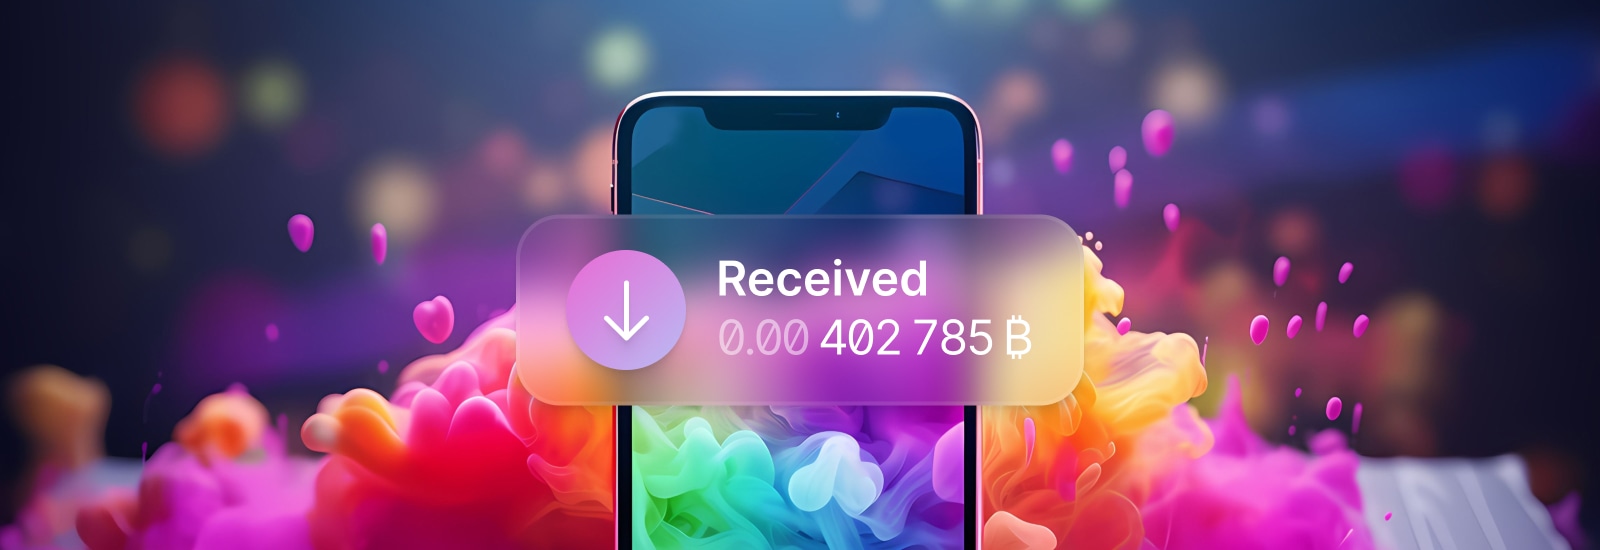 Smartphone notification showing received bitcoin